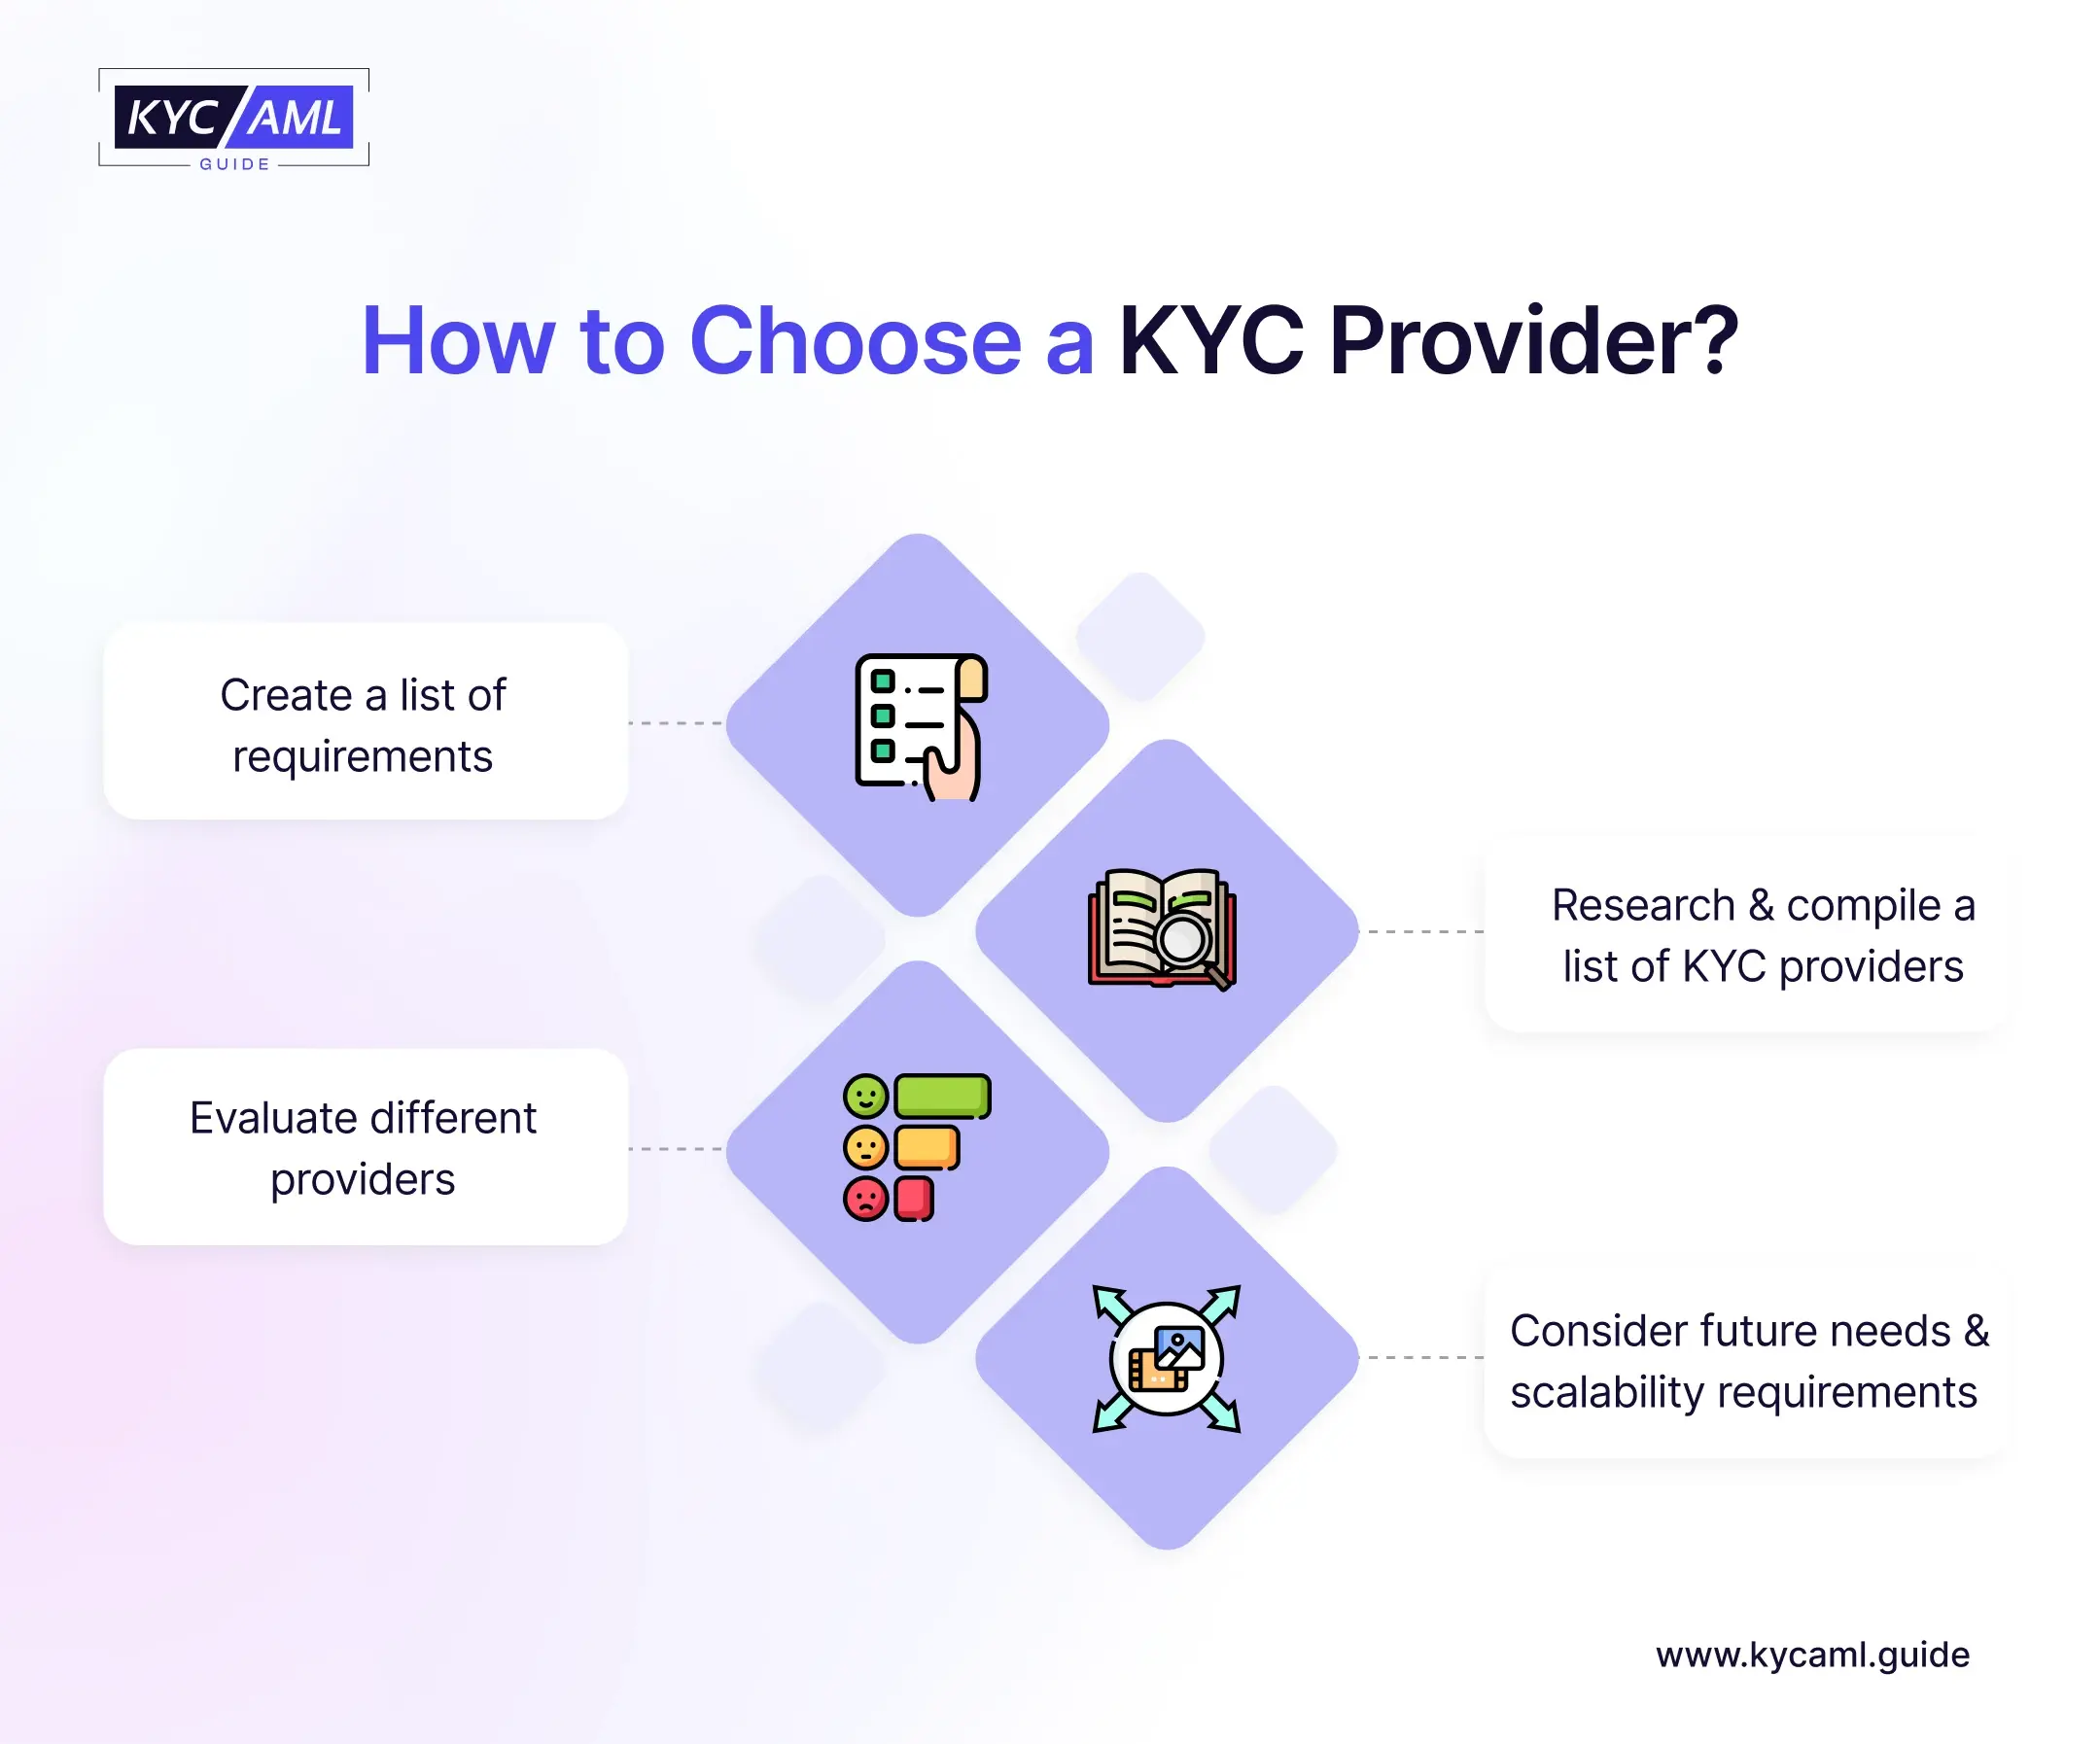 This infographic shows the steps to choose a KYC provider. They include creating a list of requirements, researching and evaluating different KYC providers, and considering future needs and scalability requirements.